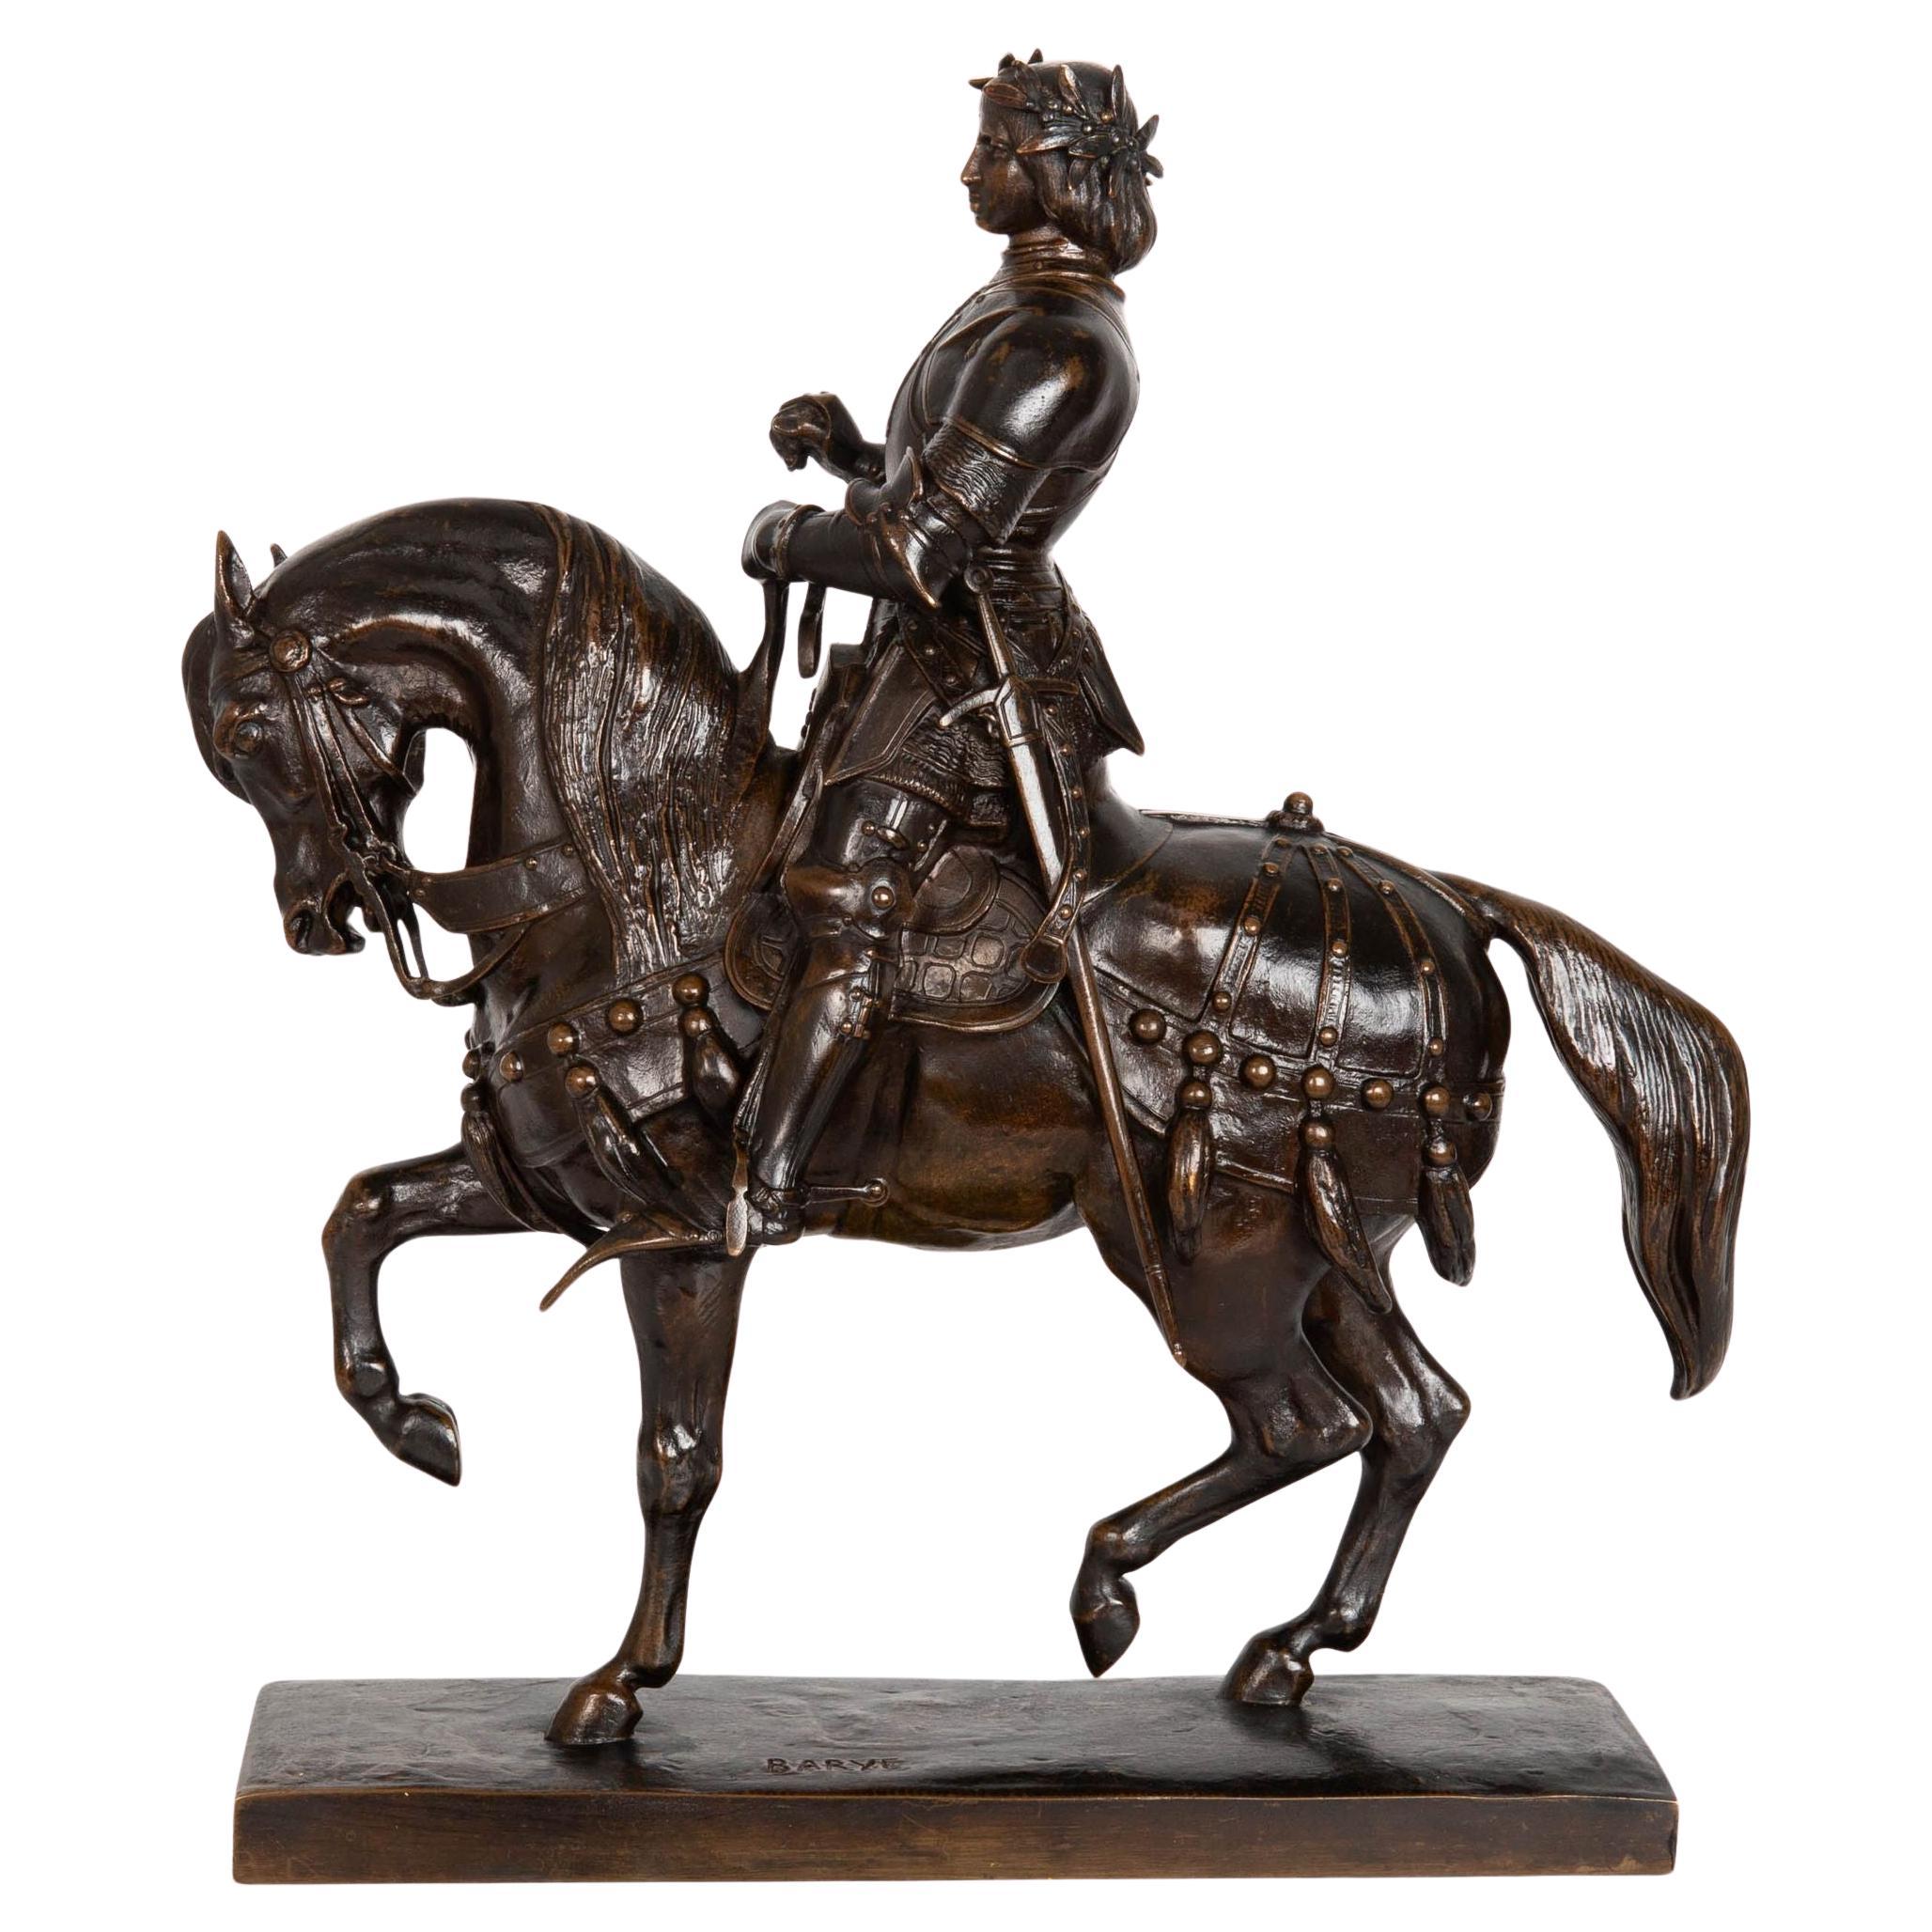 Rare Bronze Sculpture “Charles VII, The Victorious” by Antoine-Louis Barye